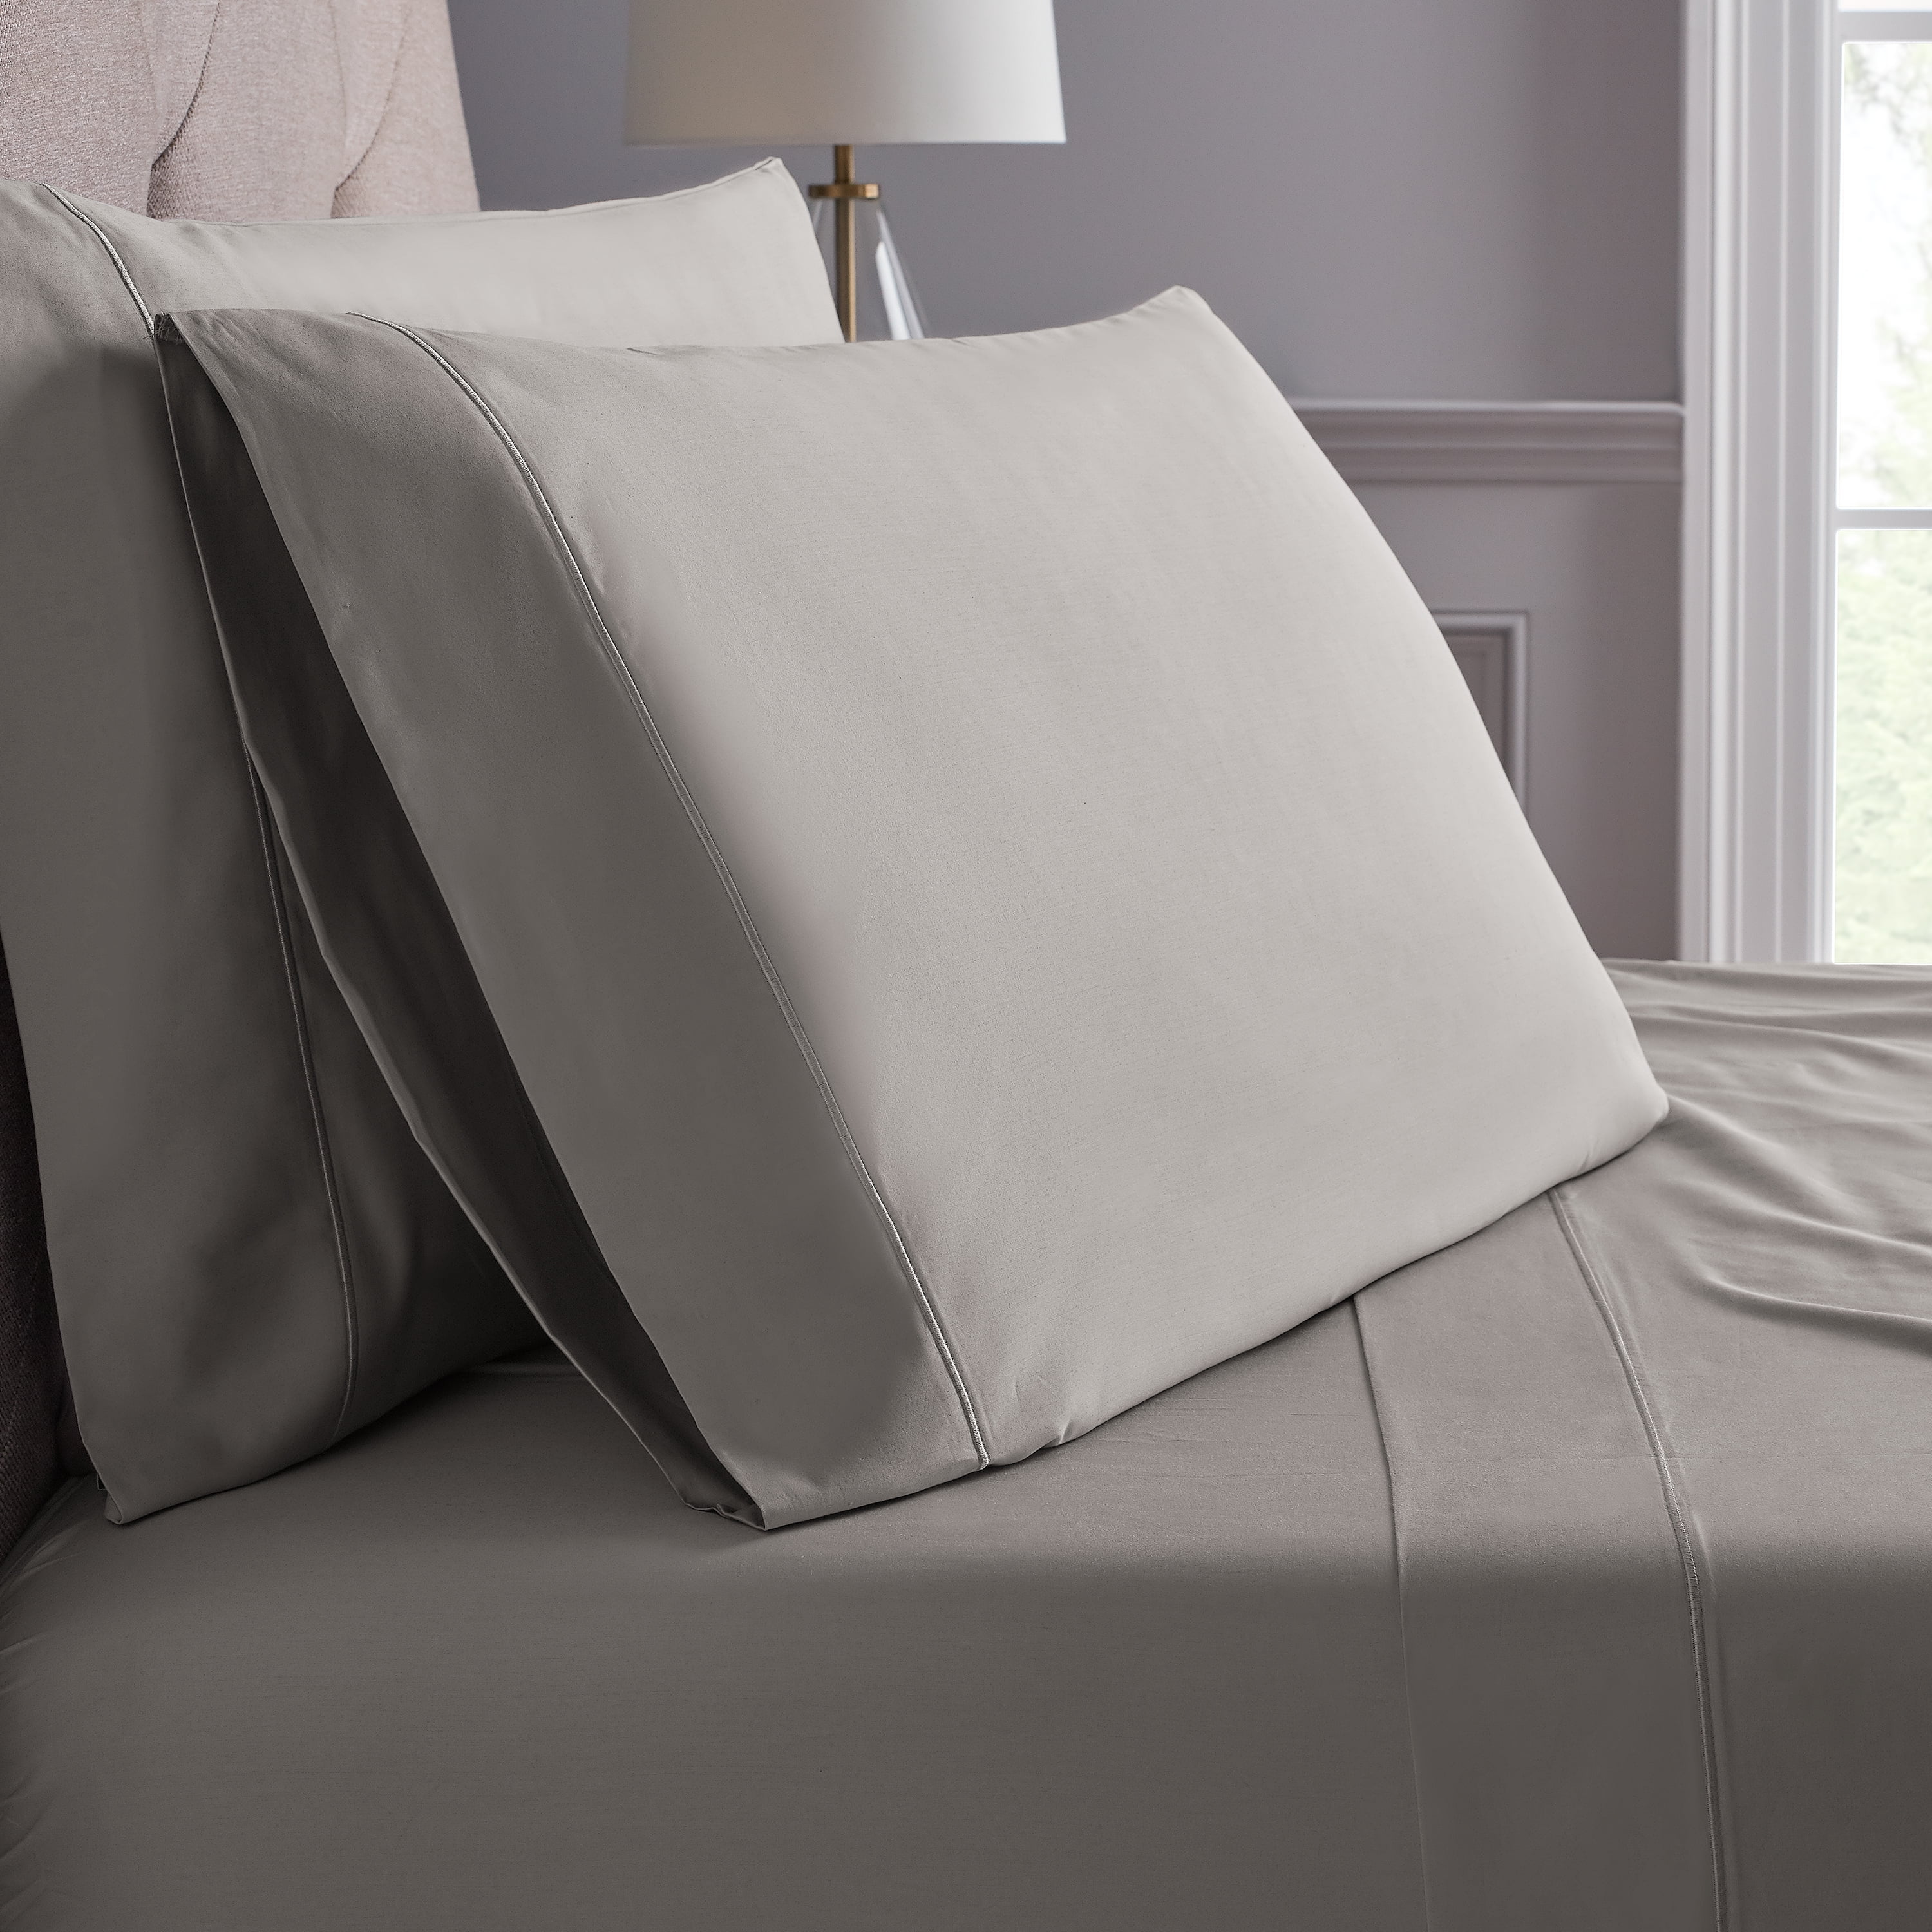 Brentwood Home - Luxury Organic Cotton Sheets - 600 TC Slate Gray - Twin